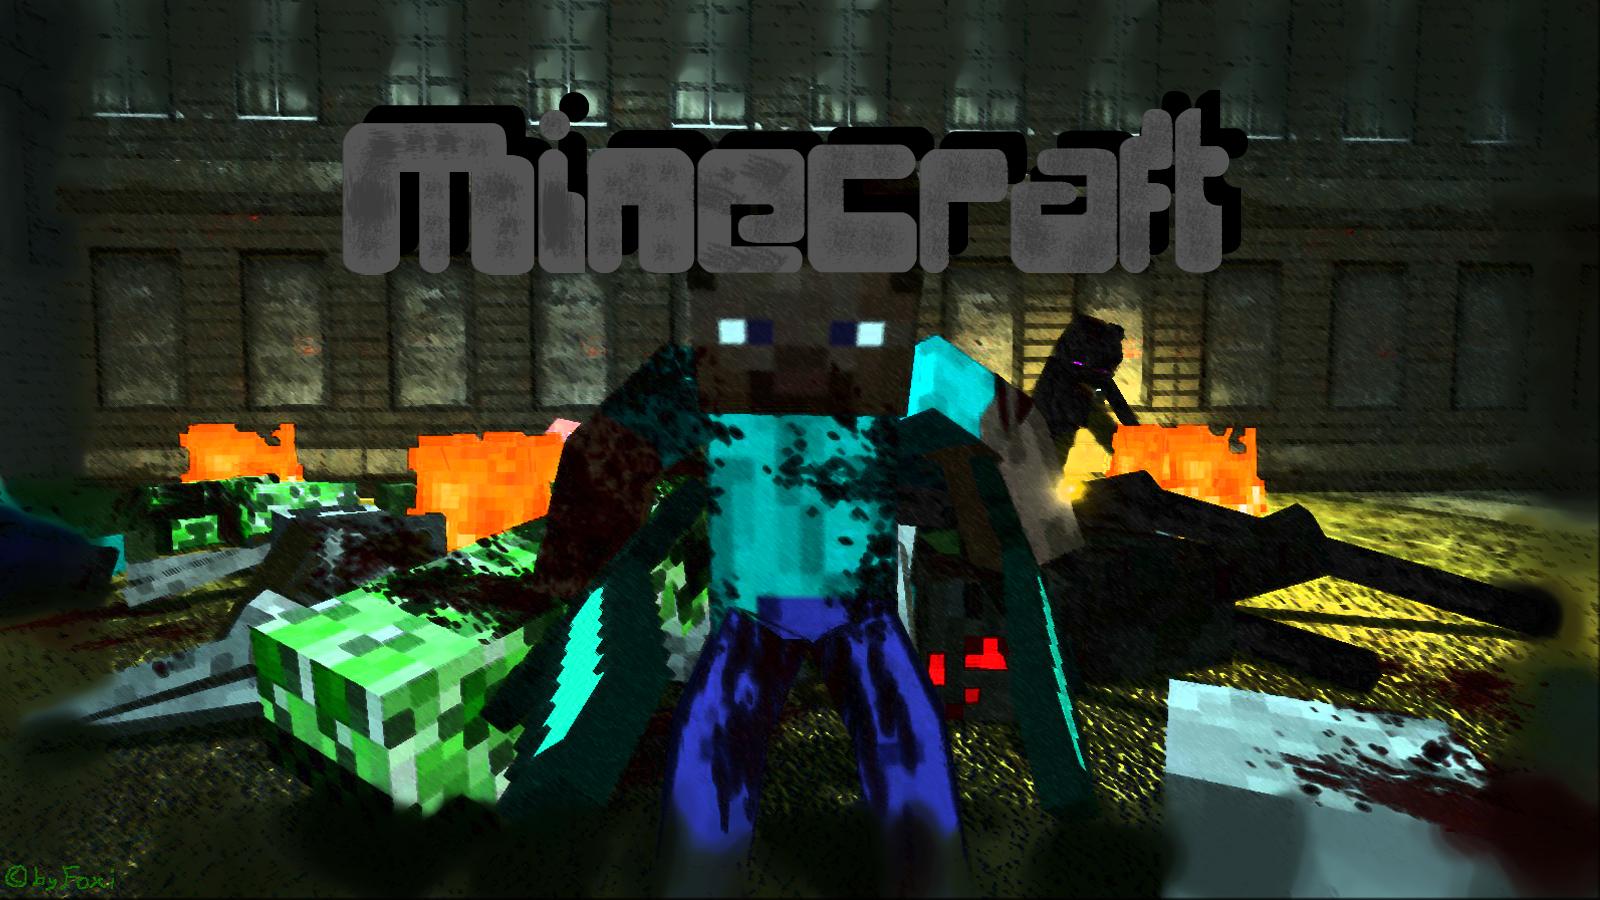 Cool Minecraft Pictures For Backgrounds